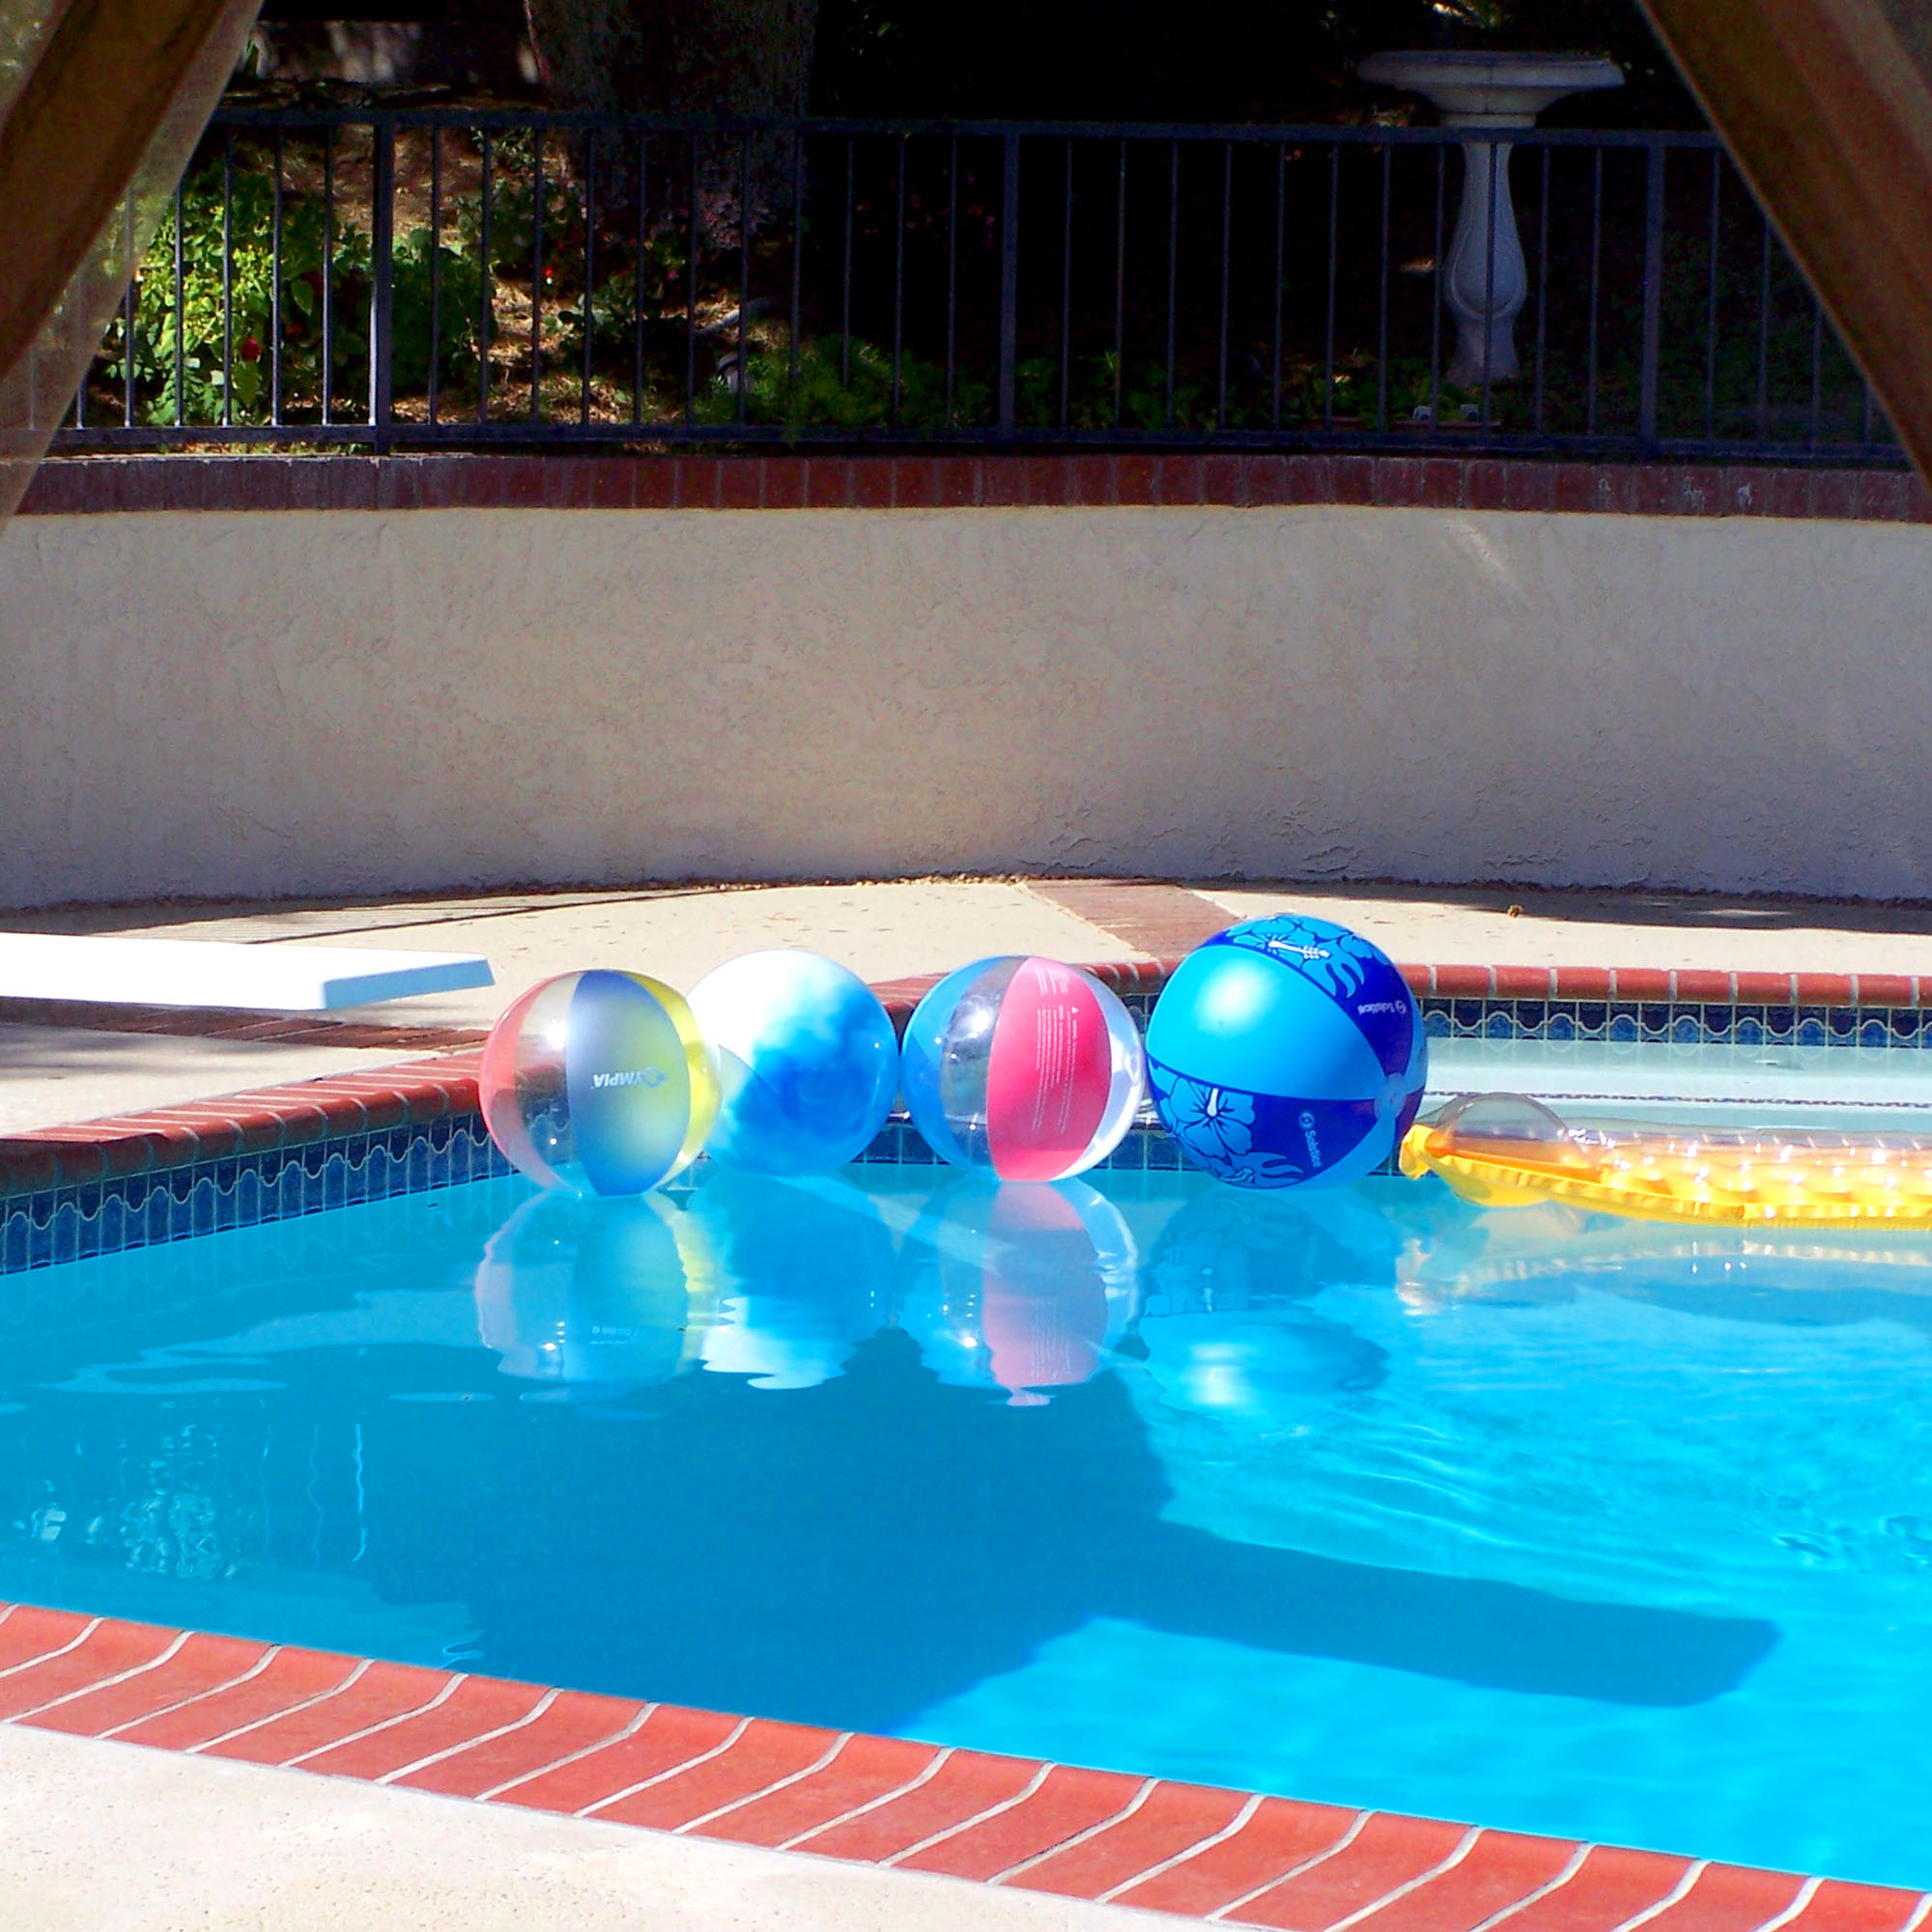 Pool Party Decoration Ideas
 Reader Question Pool party decorating ideas Dollar